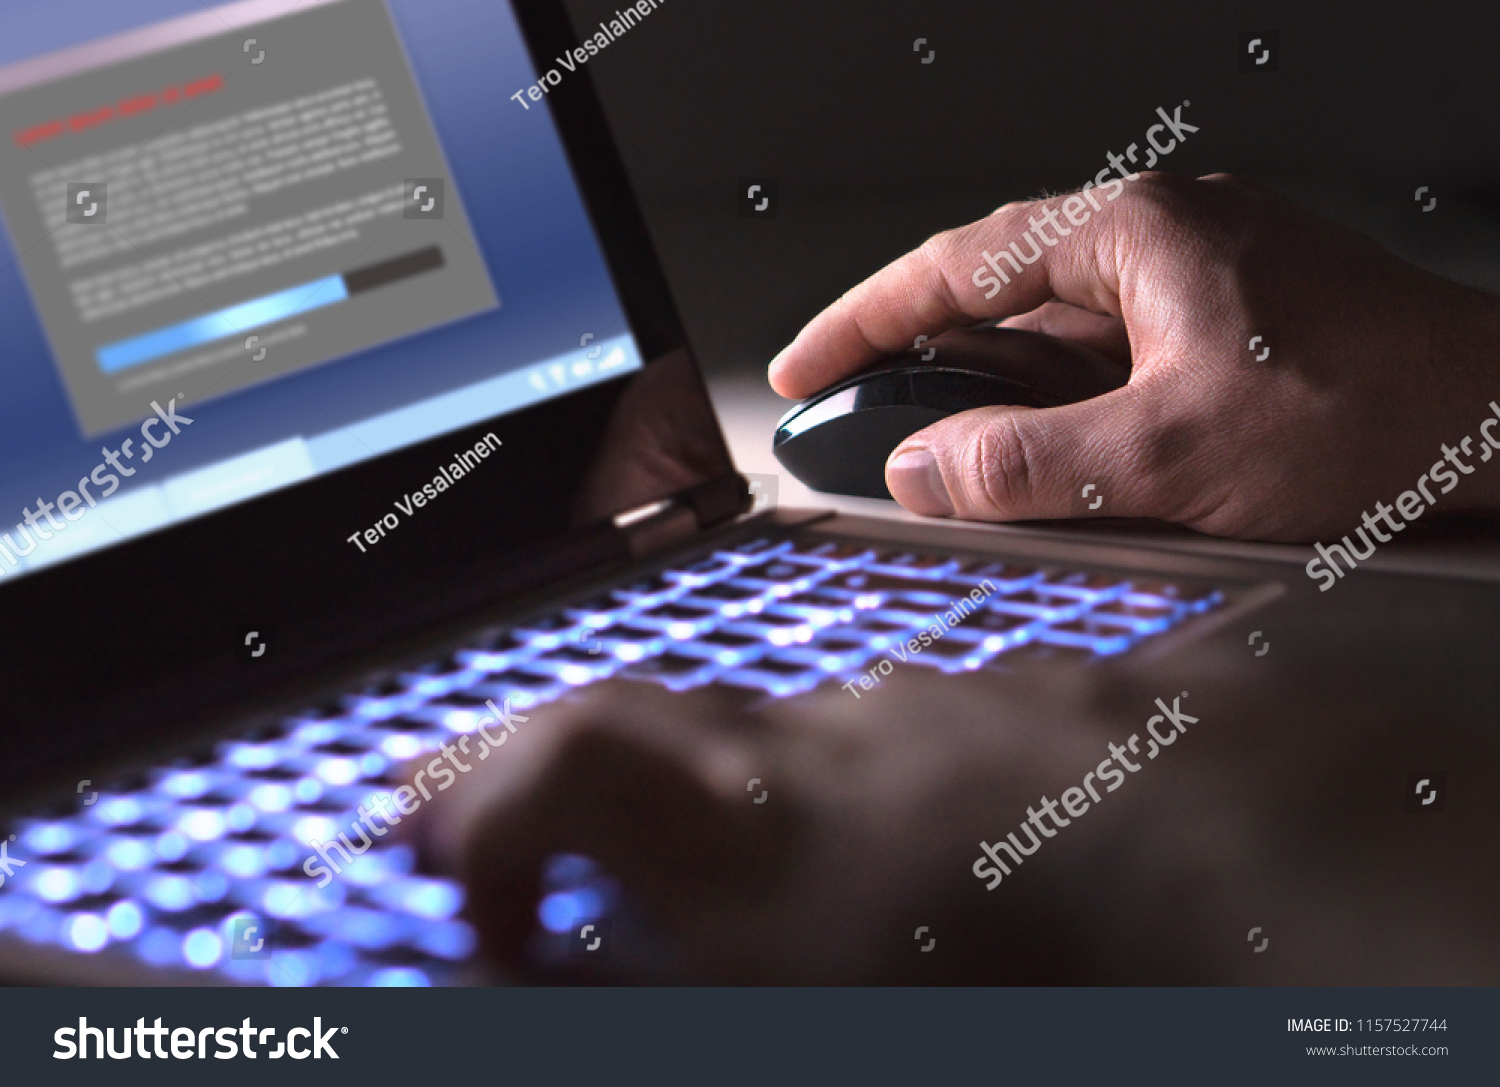 Man installing software in laptop in dark at night. Hacker loading illegal program or guy downloading files. Cyber security, piracy or virus concept. #1157527744